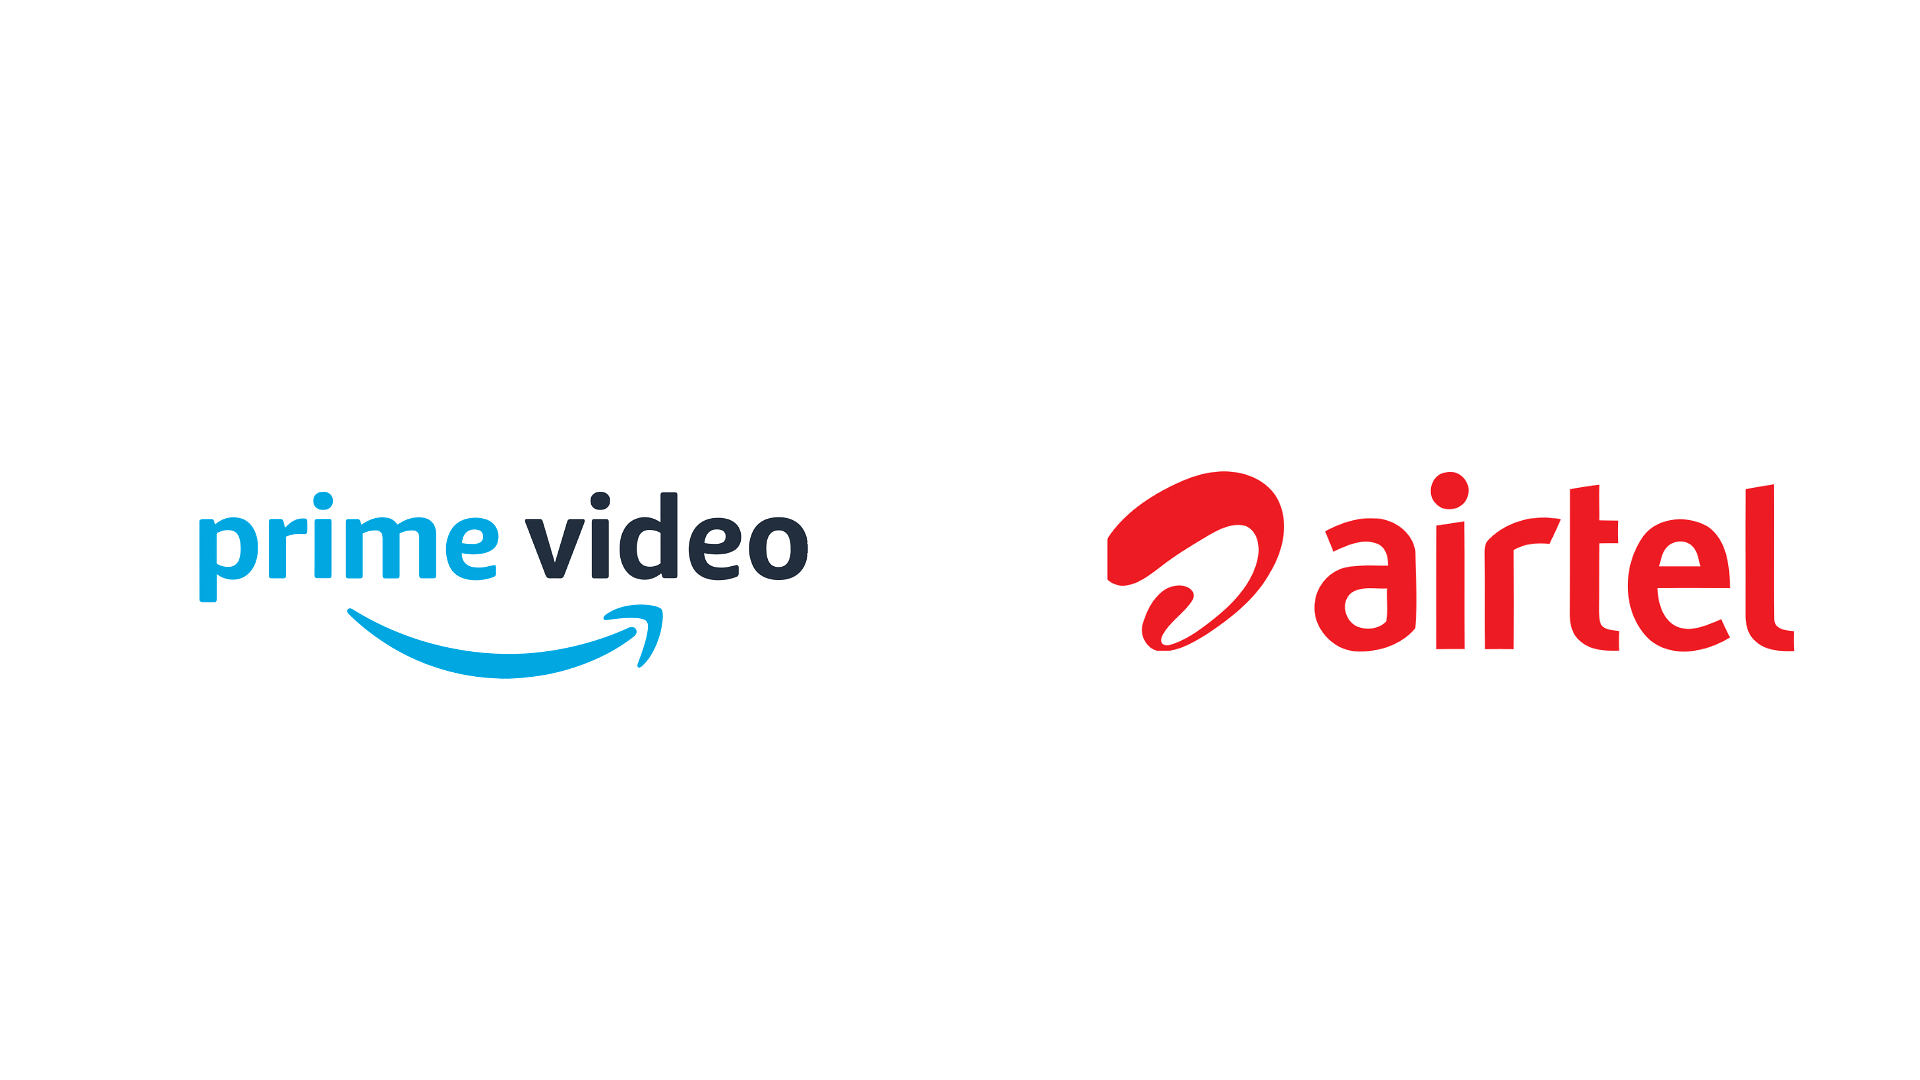 Amazon Prime Video Teams Up With Airtel To Offer Mobile Only Plan